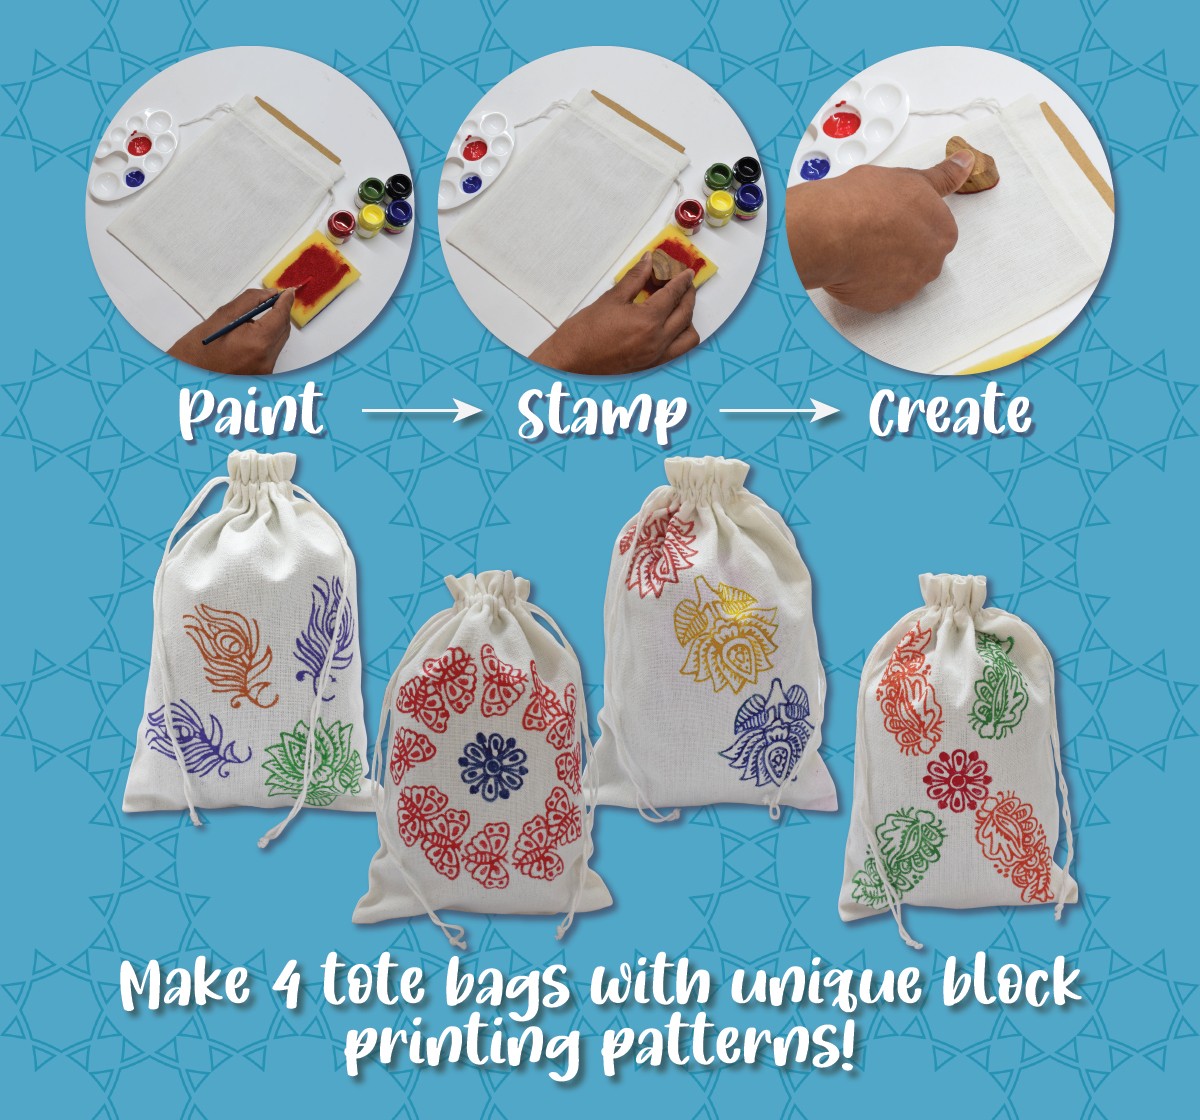 Kalakaram Block Priting Tote Bag Painting Kit for Kids, Paint your own Tote Bags, Kids Art and Craft Kit, Educational Gift for Kids, 12Y+, Multicolour